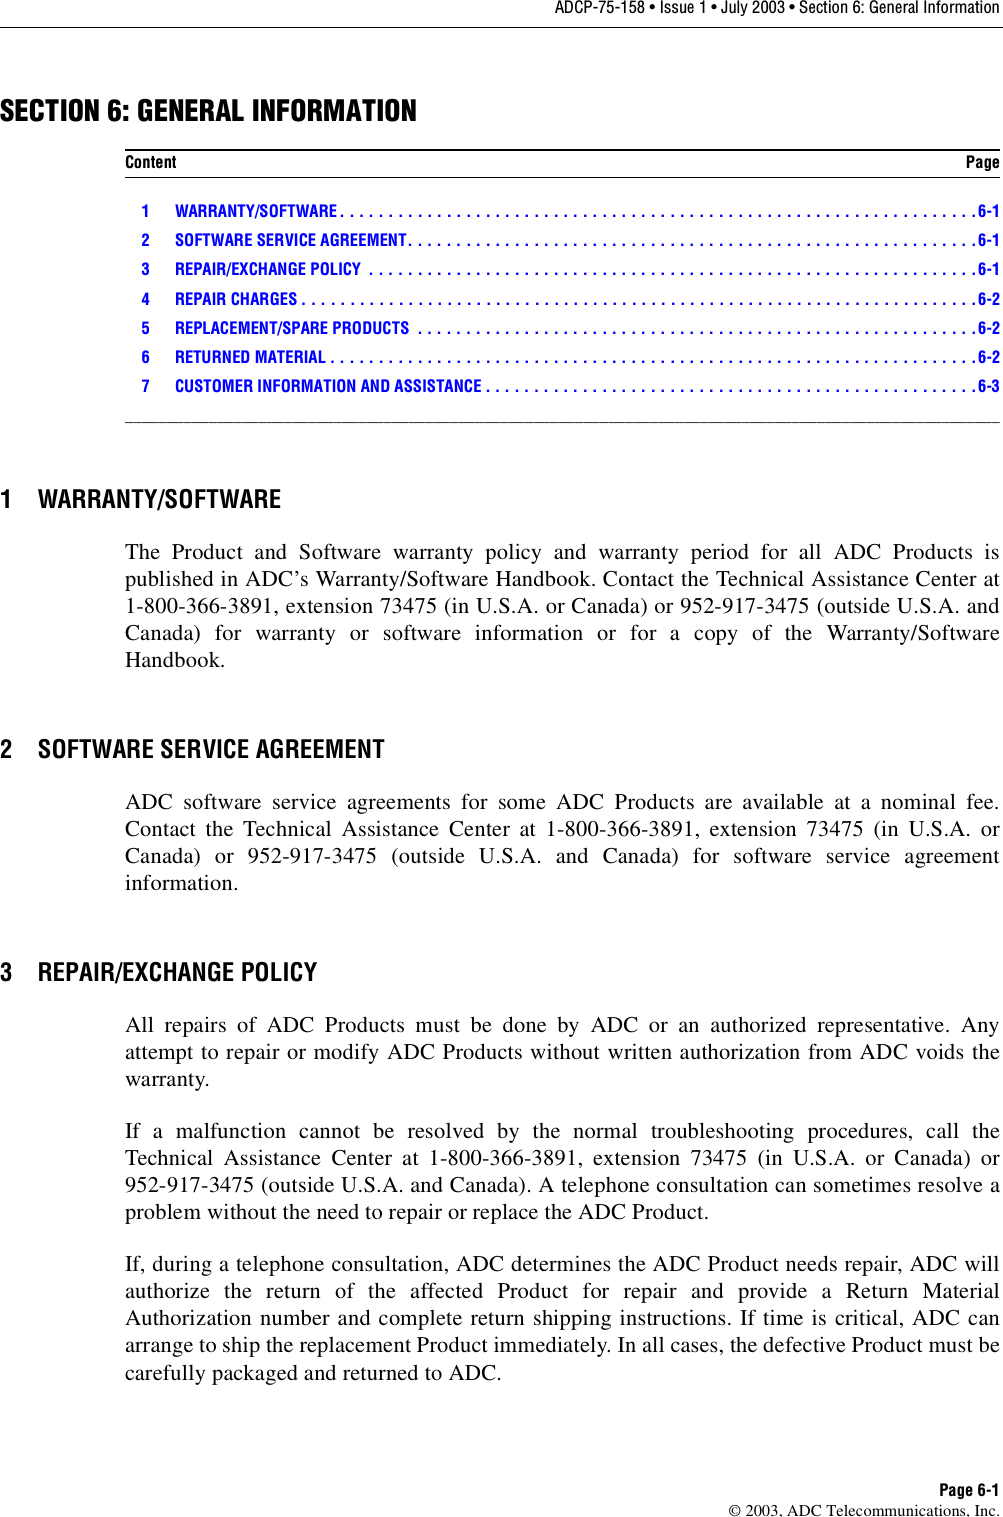 ADCP-75-158 • Issue 1 • July 2003 • Section 6: General InformationPage 6-1© 2003, ADC Telecommunications, Inc.SECTION 6: GENERAL INFORMATION1 WARRANTY/SOFTWARE . . . . . . . . . . . . . . . . . . . . . . . . . . . . . . . . . . . . . . . . . . . . . . . . . . . . . . . . . . . . . . . . . .6-12 SOFTWARE SERVICE AGREEMENT. . . . . . . . . . . . . . . . . . . . . . . . . . . . . . . . . . . . . . . . . . . . . . . . . . . . . . . . . . . 6-13 REPAIR/EXCHANGE POLICY  . . . . . . . . . . . . . . . . . . . . . . . . . . . . . . . . . . . . . . . . . . . . . . . . . . . . . . . . . . . . . . .6-14 REPAIR CHARGES . . . . . . . . . . . . . . . . . . . . . . . . . . . . . . . . . . . . . . . . . . . . . . . . . . . . . . . . . . . . . . . . . . . . . .6-25 REPLACEMENT/SPARE PRODUCTS  . . . . . . . . . . . . . . . . . . . . . . . . . . . . . . . . . . . . . . . . . . . . . . . . . . . . . . . . . .6-26 RETURNED MATERIAL . . . . . . . . . . . . . . . . . . . . . . . . . . . . . . . . . . . . . . . . . . . . . . . . . . . . . . . . . . . . . . . . . . .6-27 CUSTOMER INFORMATION AND ASSISTANCE . . . . . . . . . . . . . . . . . . . . . . . . . . . . . . . . . . . . . . . . . . . . . . . . . . .6-3_________________________________________________________________________________________________________1 WARRANTY/SOFTWAREThe Product and Software warranty policy and warranty period for all ADC Products ispublished in ADC’s Warranty/Software Handbook. Contact the Technical Assistance Center at1-800-366-3891, extension 73475 (in U.S.A. or Canada) or 952-917-3475 (outside U.S.A. andCanada) for warranty or software information or for a copy of the Warranty/SoftwareHandbook.2 SOFTWARE SERVICE AGREEMENTADC software service agreements for some ADC Products are available at a nominal fee.Contact the Technical Assistance Center at 1-800-366-3891, extension 73475 (in U.S.A. orCanada) or 952-917-3475 (outside U.S.A. and Canada) for software service agreementinformation.3 REPAIR/EXCHANGE POLICYAll repairs of ADC Products must be done by ADC or an authorized representative. Anyattempt to repair or modify ADC Products without written authorization from ADC voids thewarranty.If a malfunction cannot be resolved by the normal troubleshooting procedures, call theTechnical Assistance Center at 1-800-366-3891, extension 73475 (in U.S.A. or Canada) or952-917-3475 (outside U.S.A. and Canada). A telephone consultation can sometimes resolve aproblem without the need to repair or replace the ADC Product.If, during a telephone consultation, ADC determines the ADC Product needs repair, ADC willauthorize the return of the affected Product for repair and provide a Return MaterialAuthorization number and complete return shipping instructions. If time is critical, ADC canarrange to ship the replacement Product immediately. In all cases, the defective Product must becarefully packaged and returned to ADC.Content Page